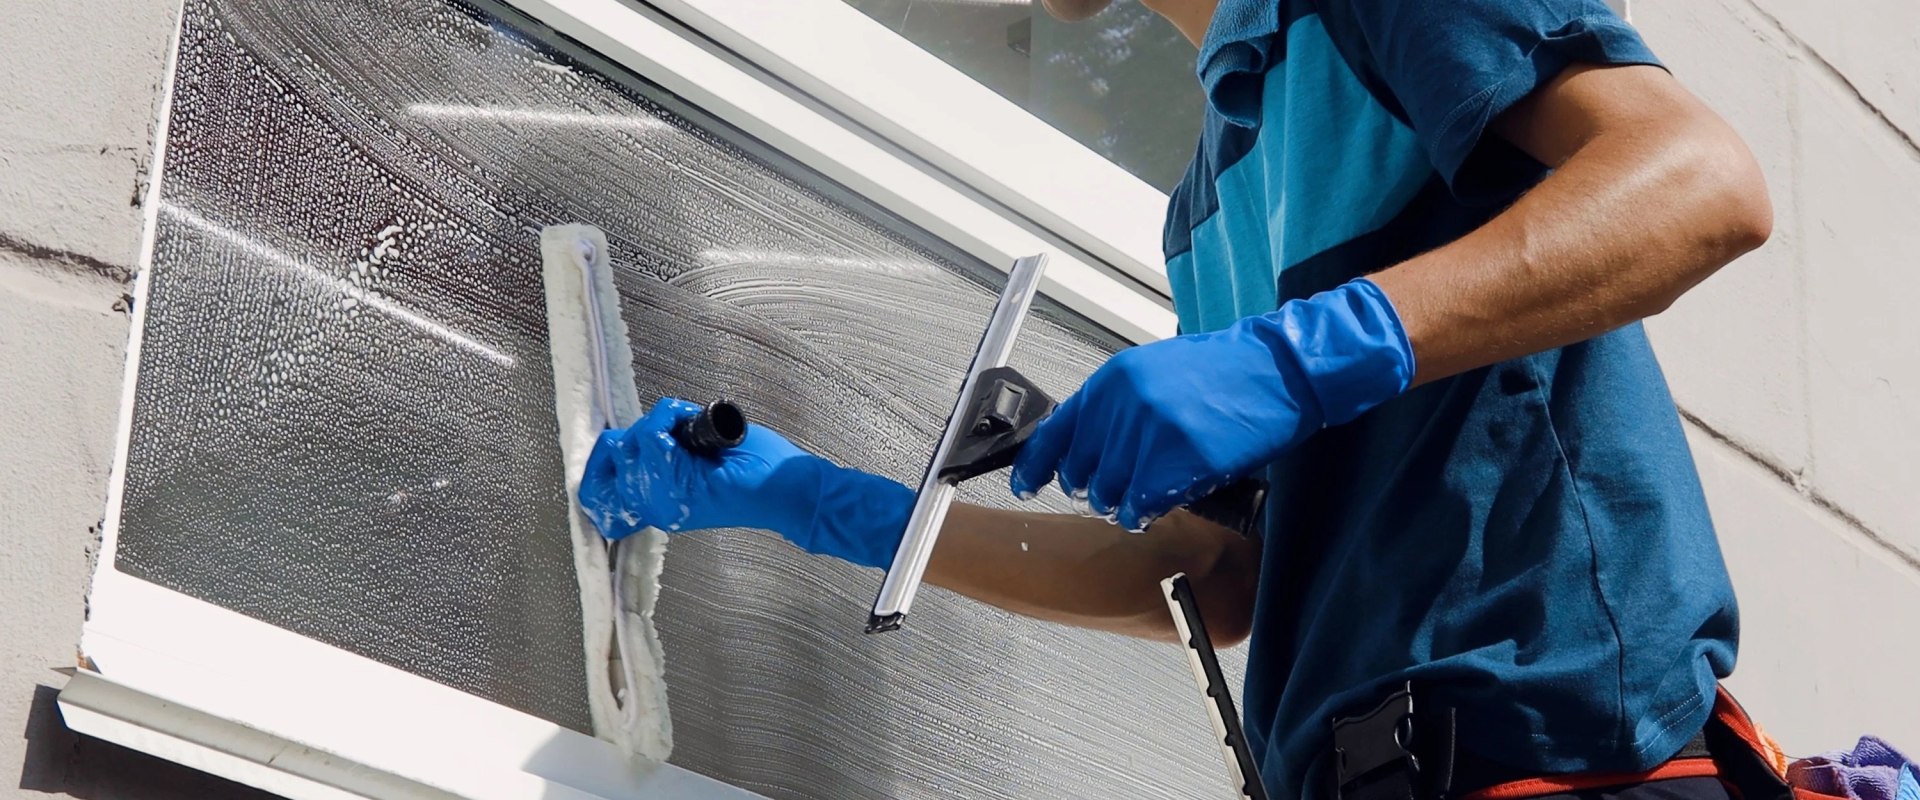 Do You Need a License to Clean Windows in Florida?